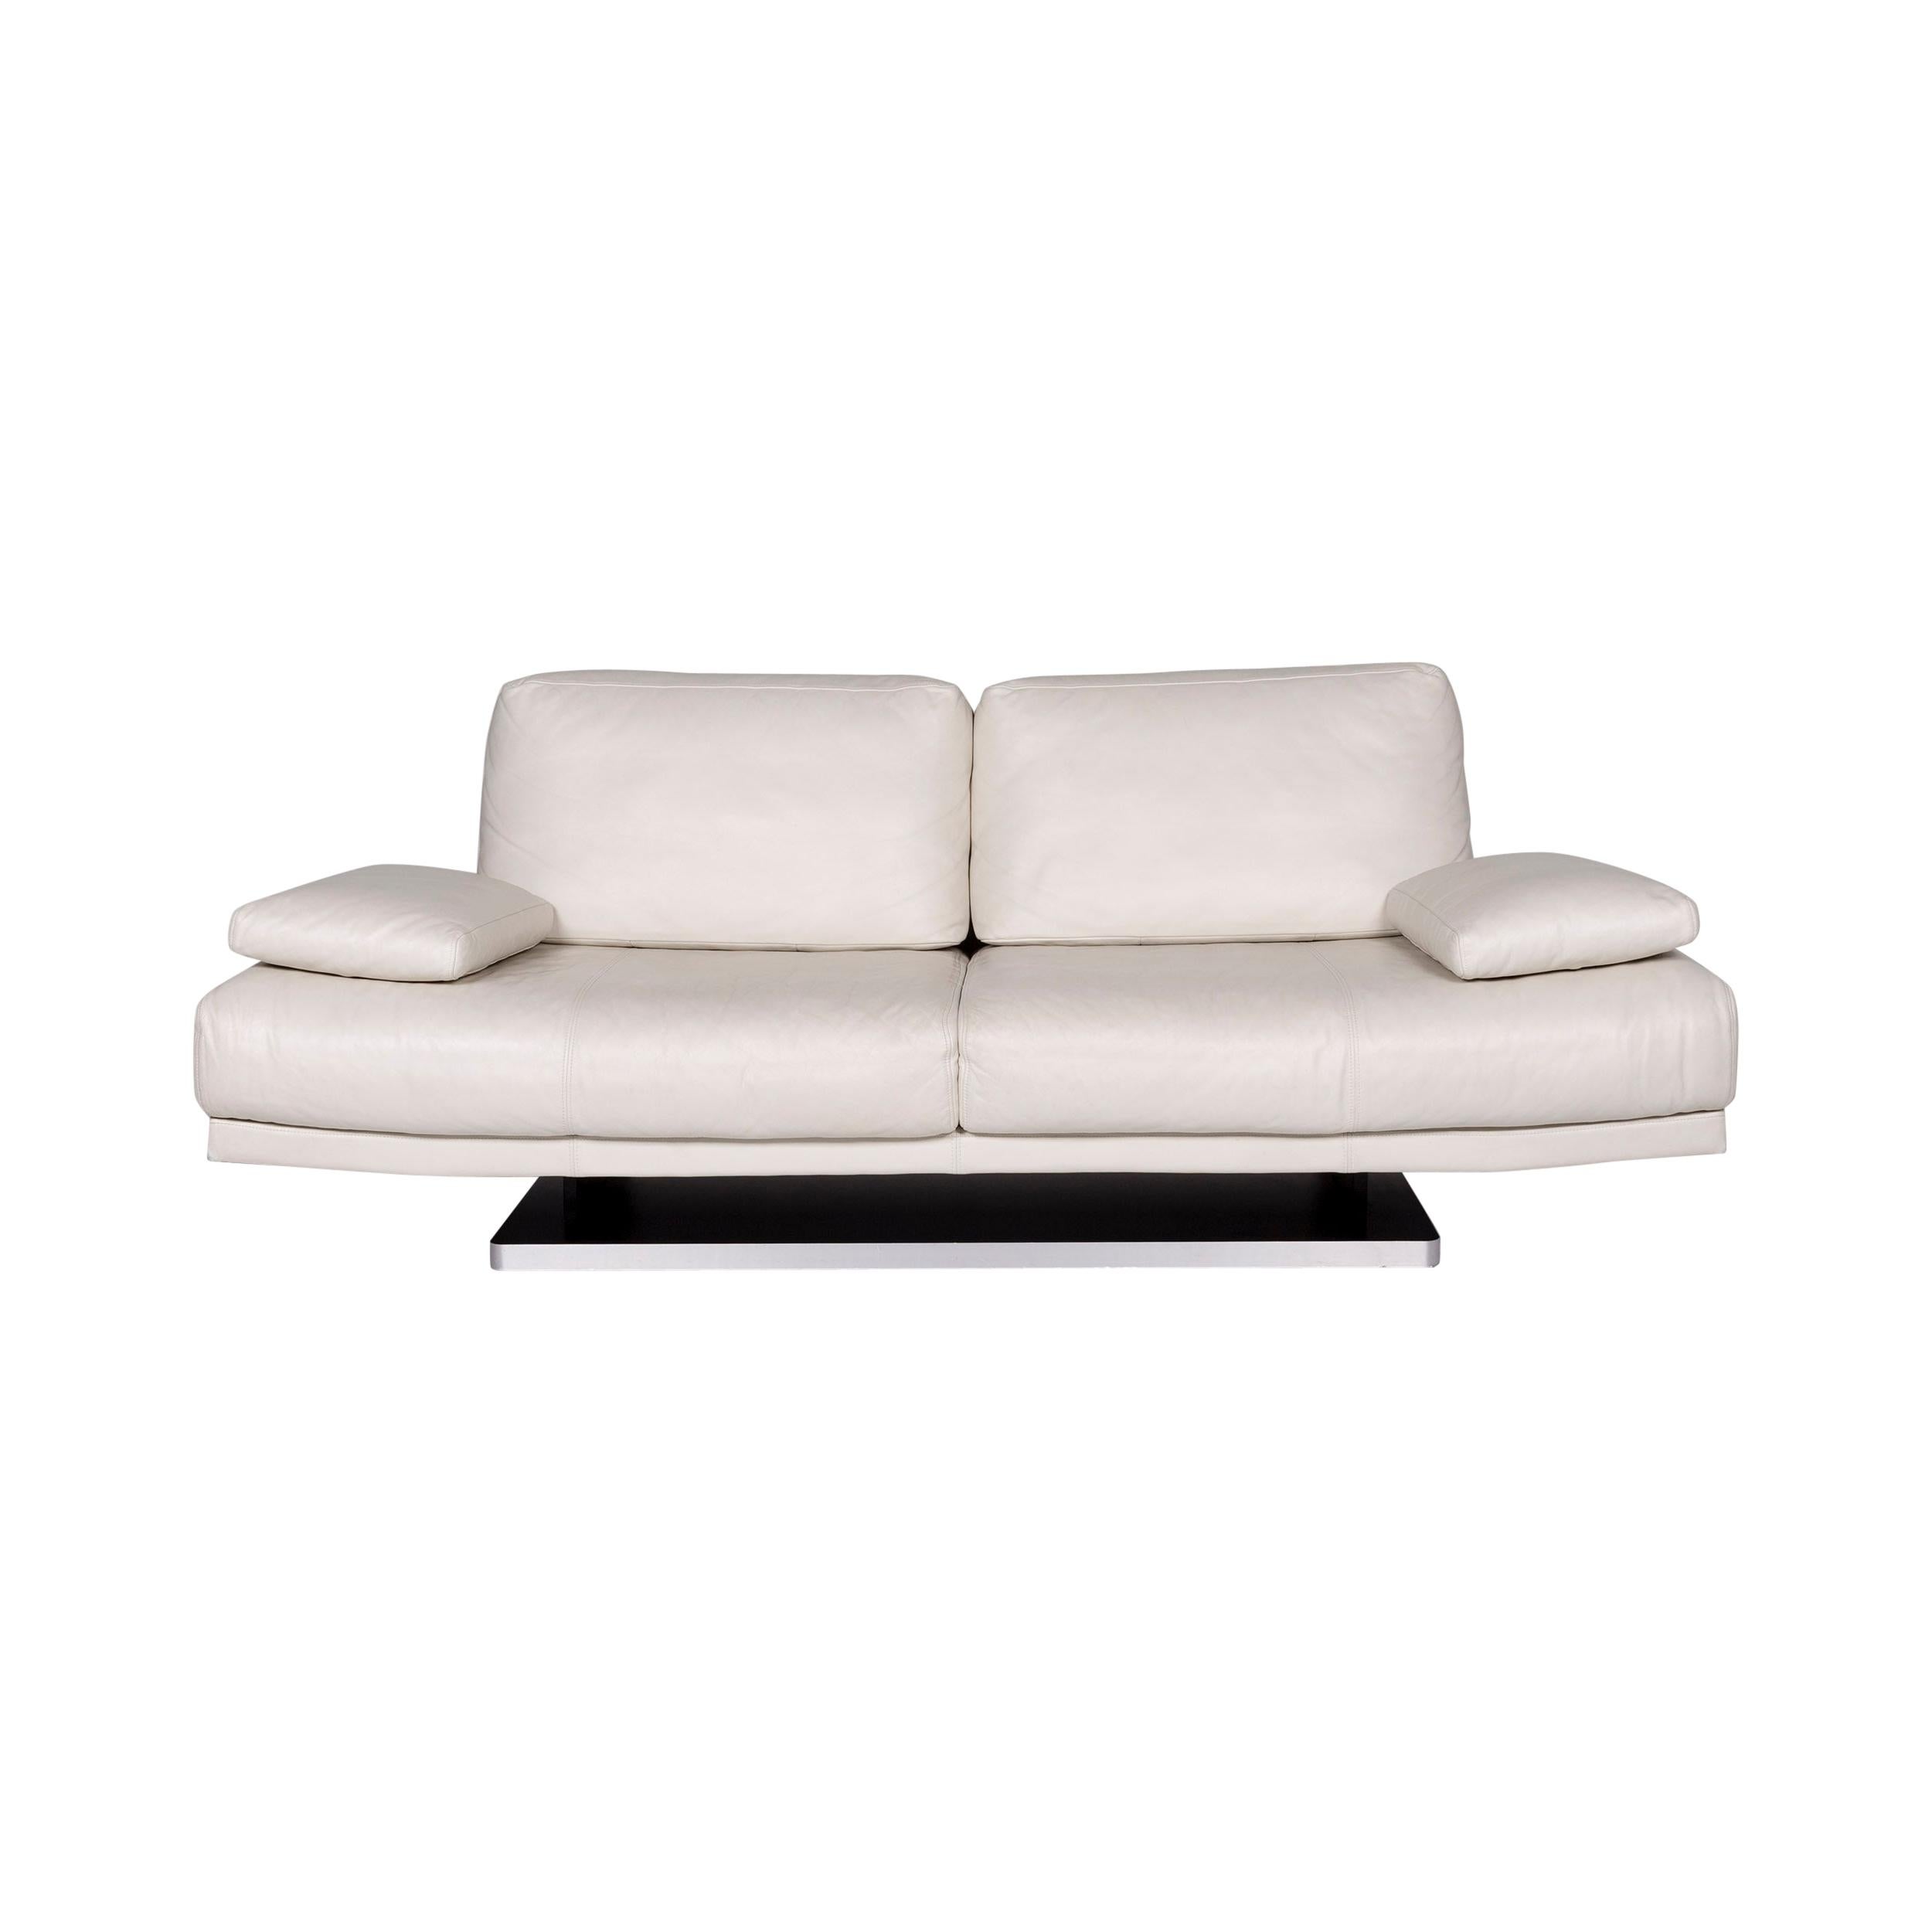 Rolf Benz Rolf Benz 345 Leather Sofa White Two-Seat Couch